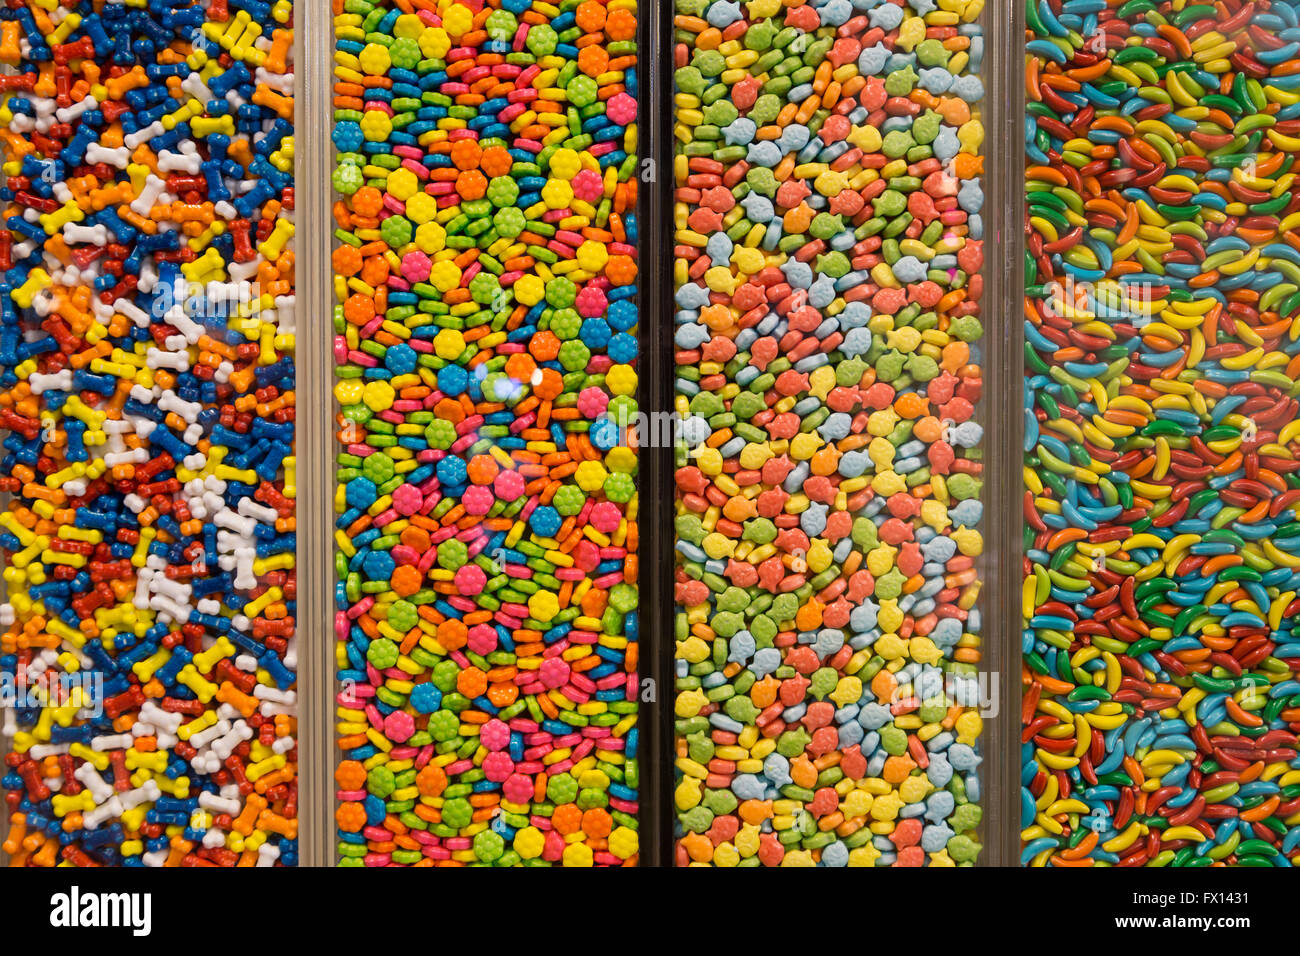 Taipei, Taiwan - January 04, 2015: Taiwanese colorful sweets in boxes for sale. Stock Photo